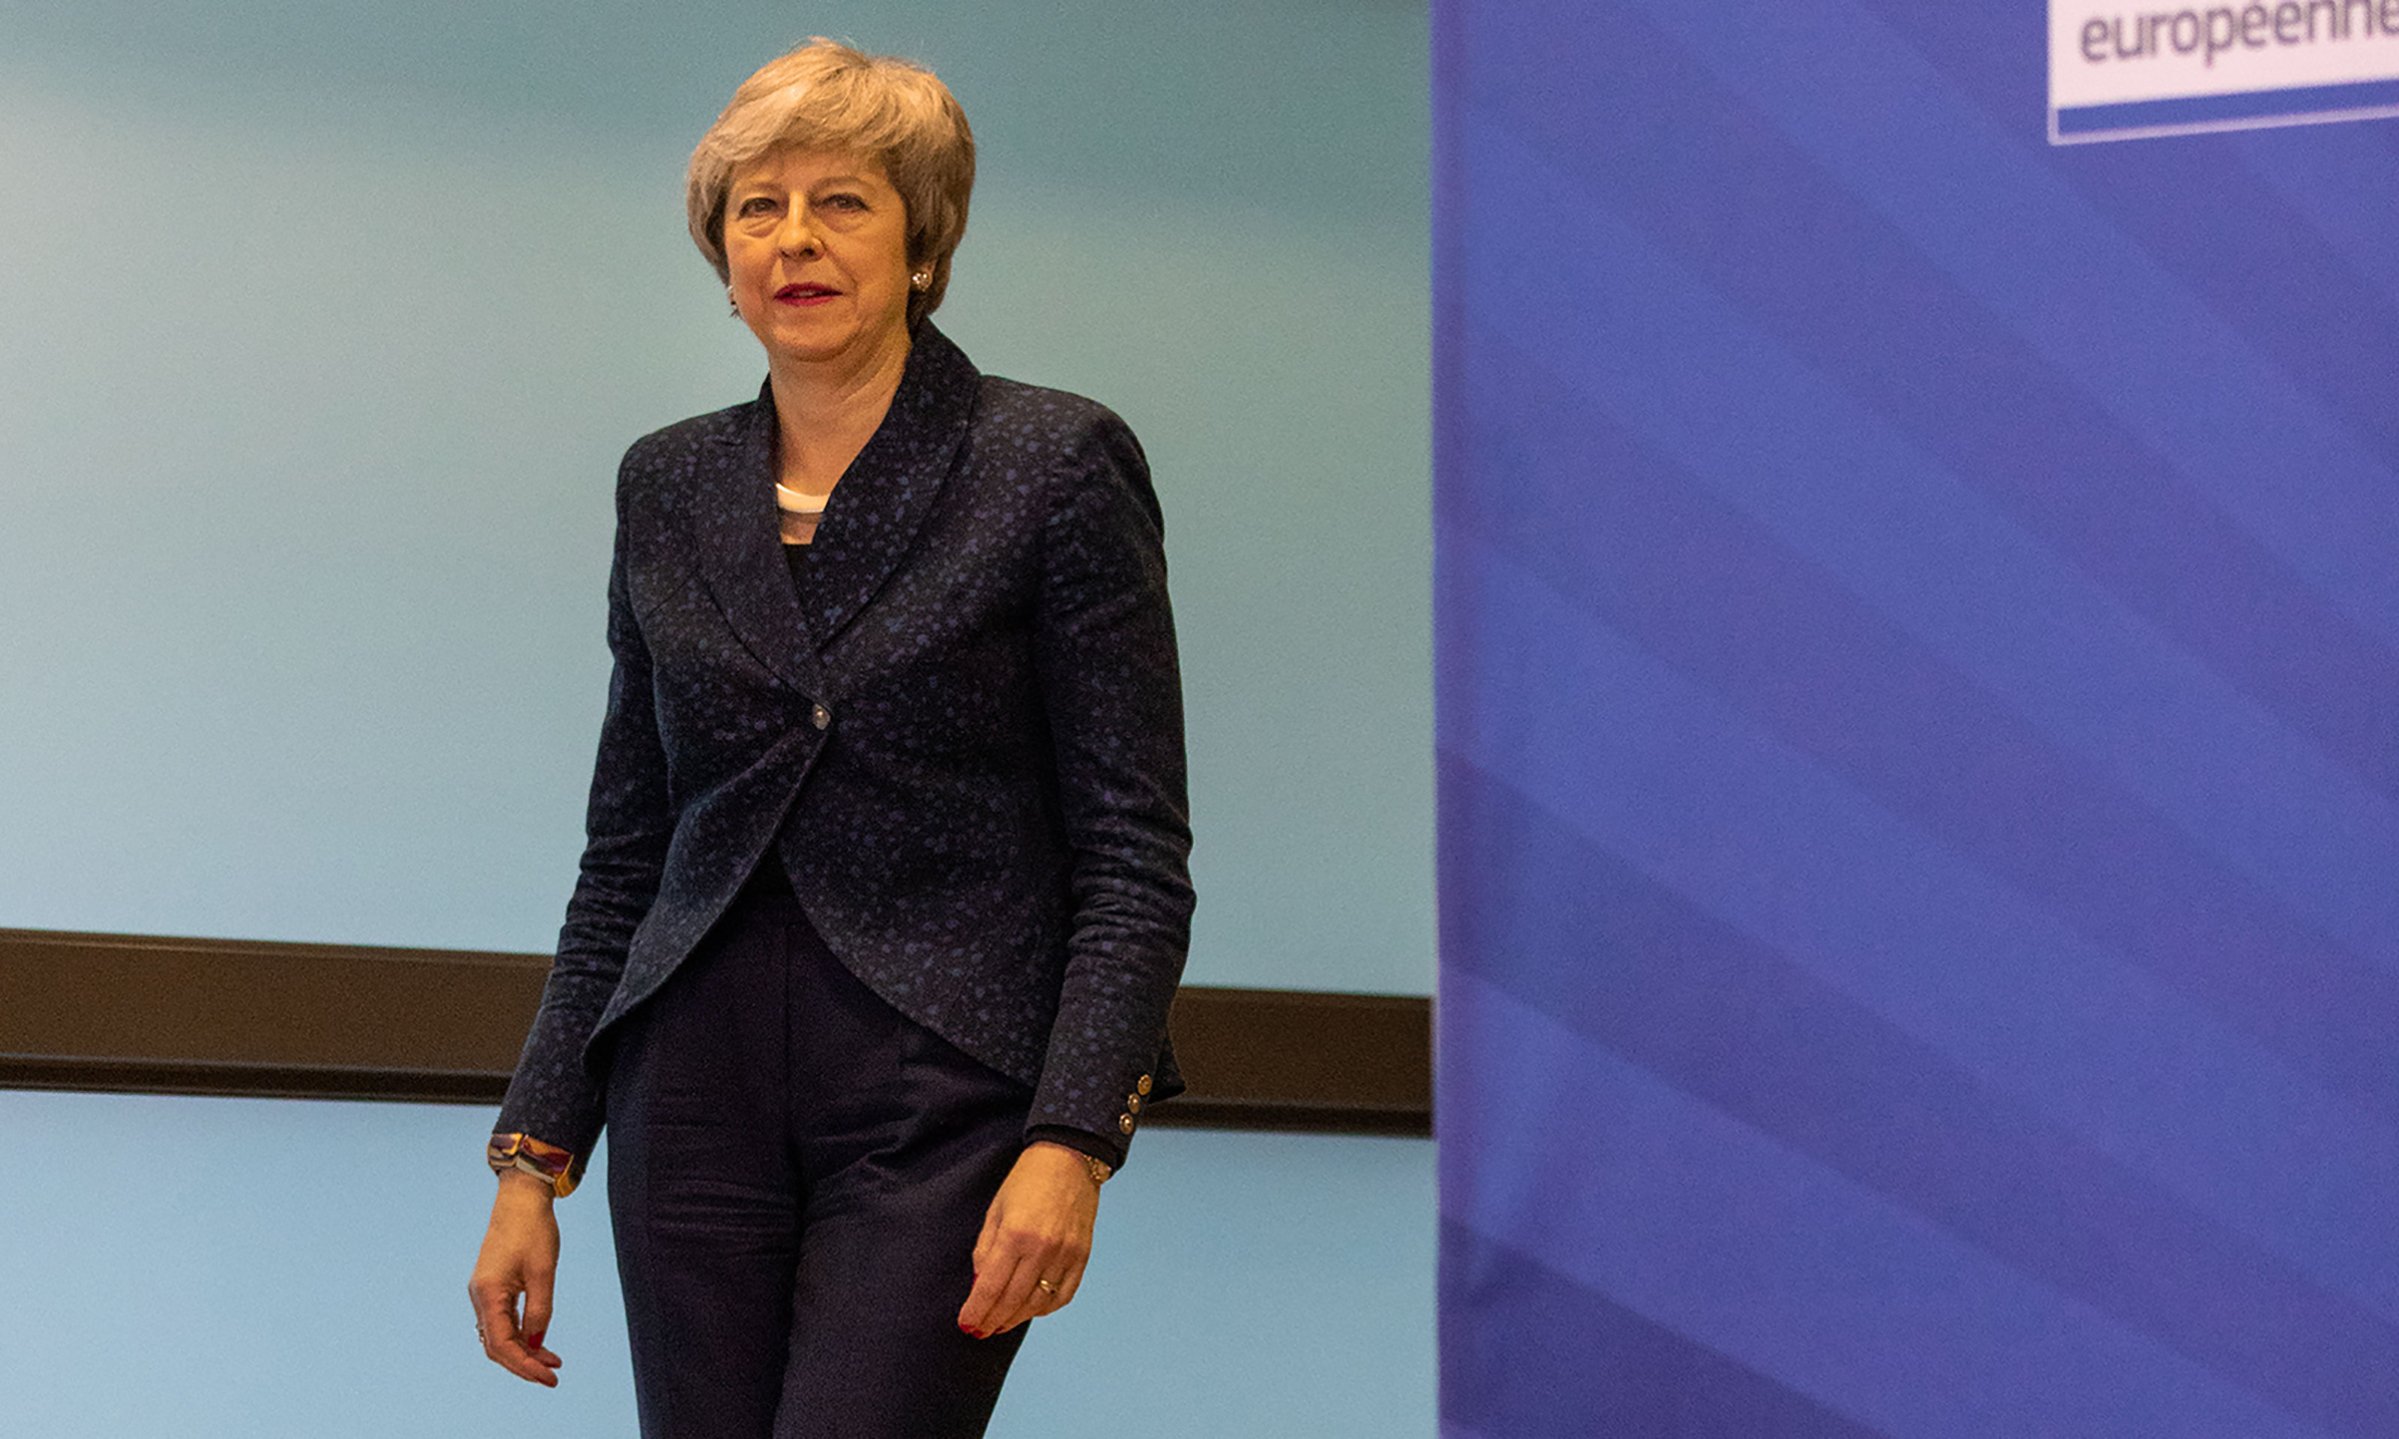 ‘I know there is a desire for a new approach and new leadership.’ — Theresa May, in a March 27 speech to Conservative lawmakers